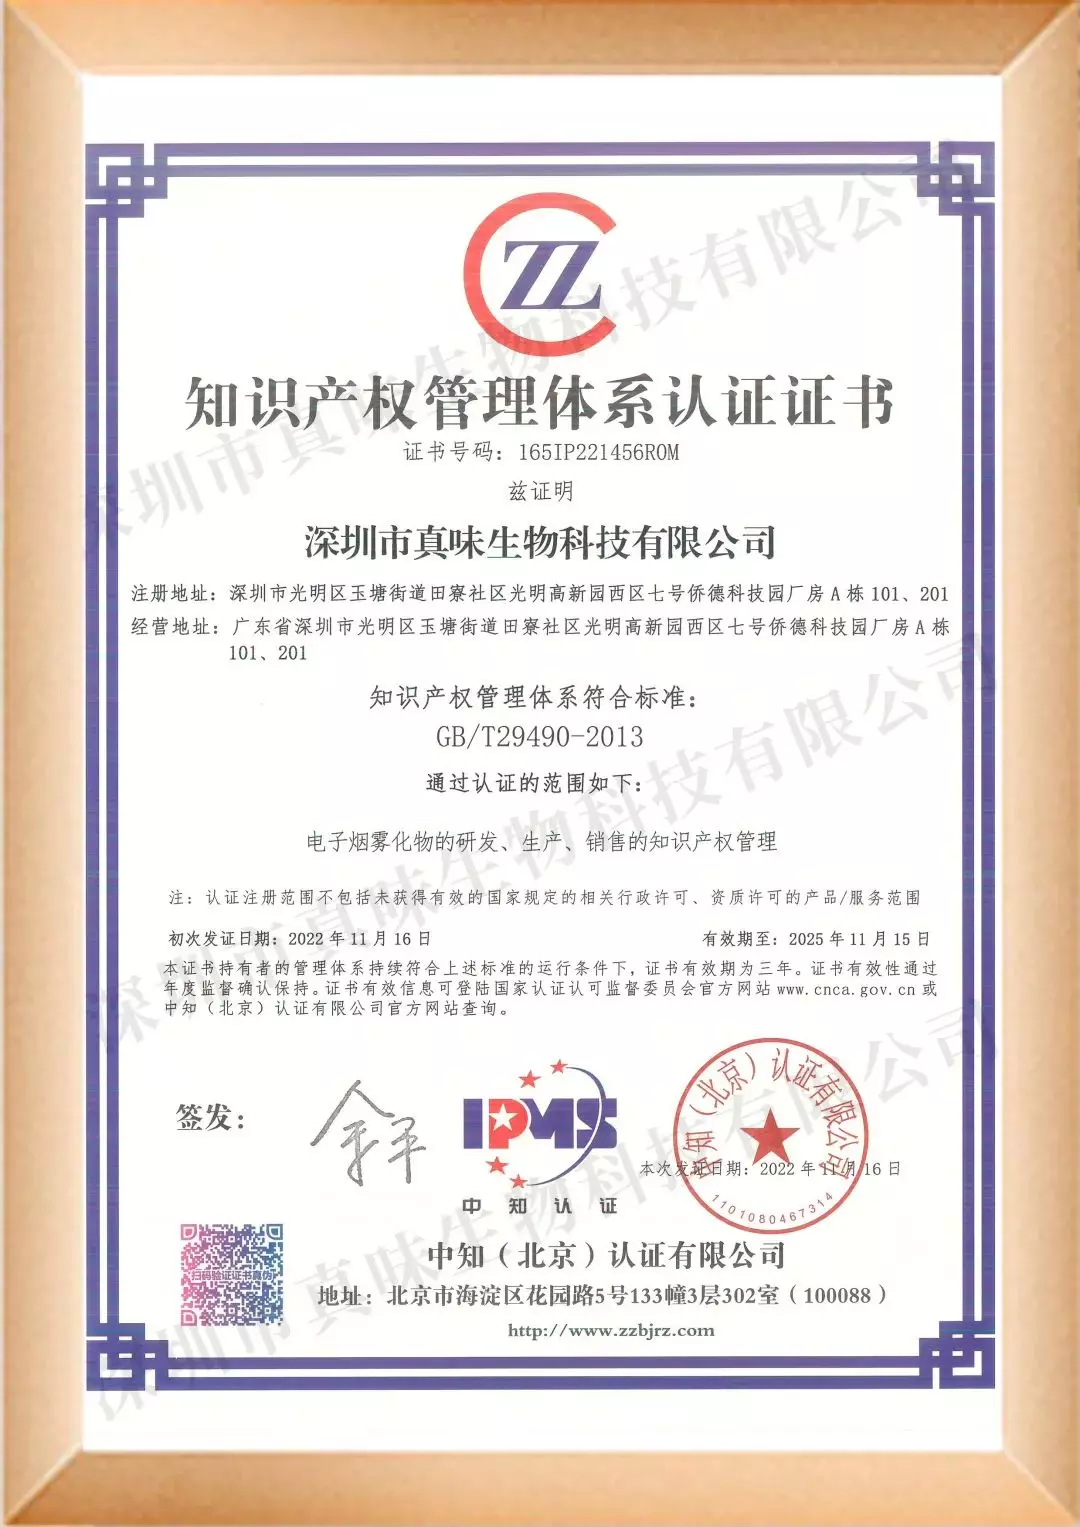 Zinwi Biotech has obtained the GB/T 29490 certification for intellectual property management system, and is leveraging this momentum to convey brand power